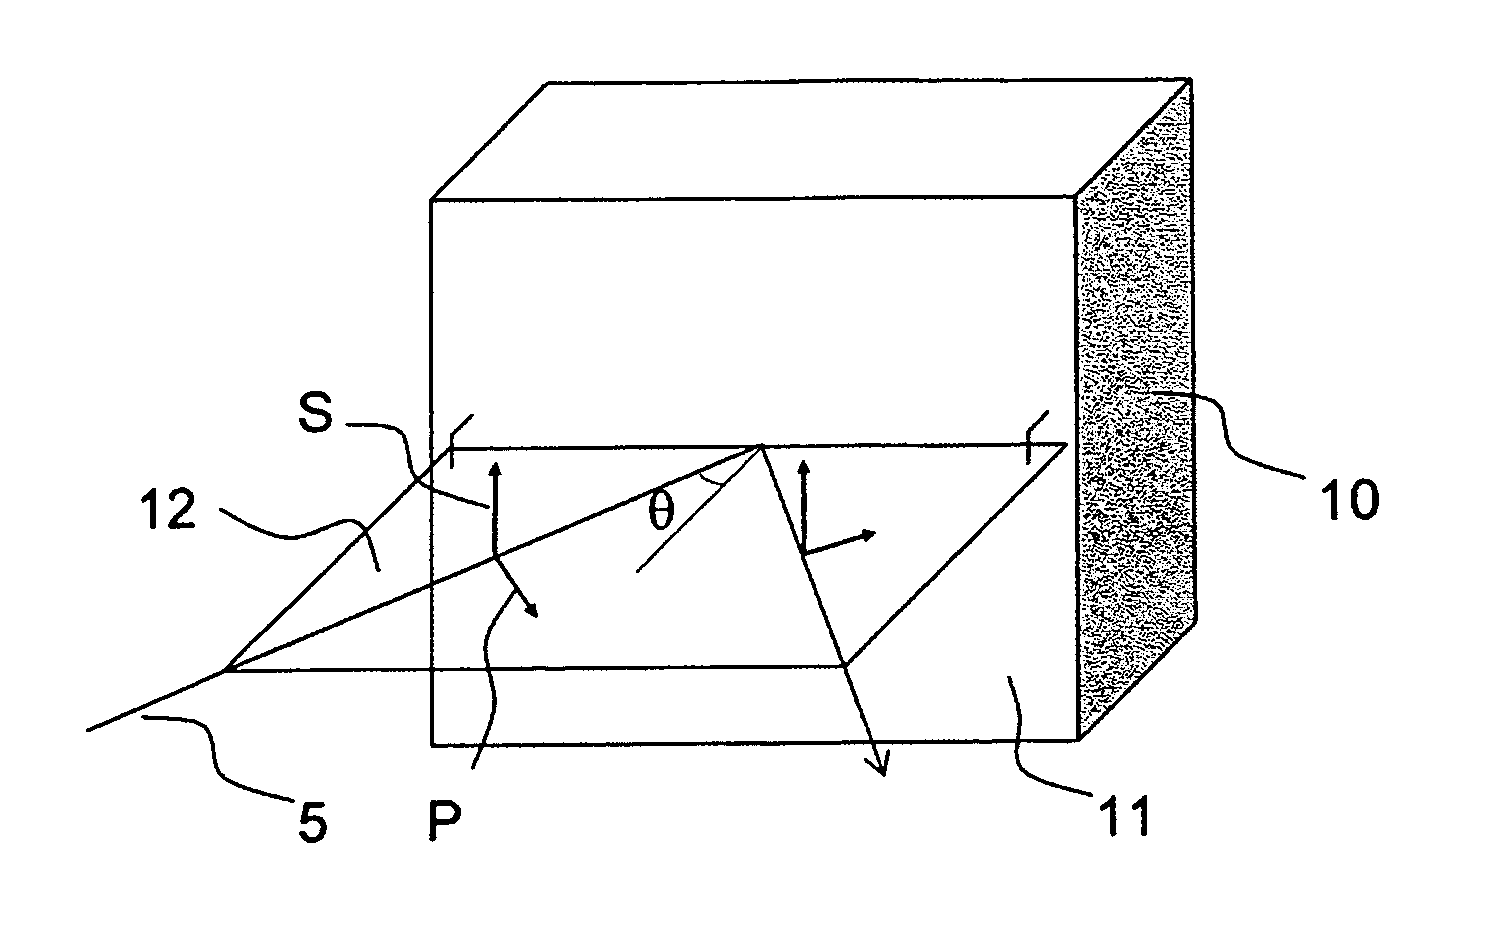 Device for detecting non-metallic objects located on a human subject